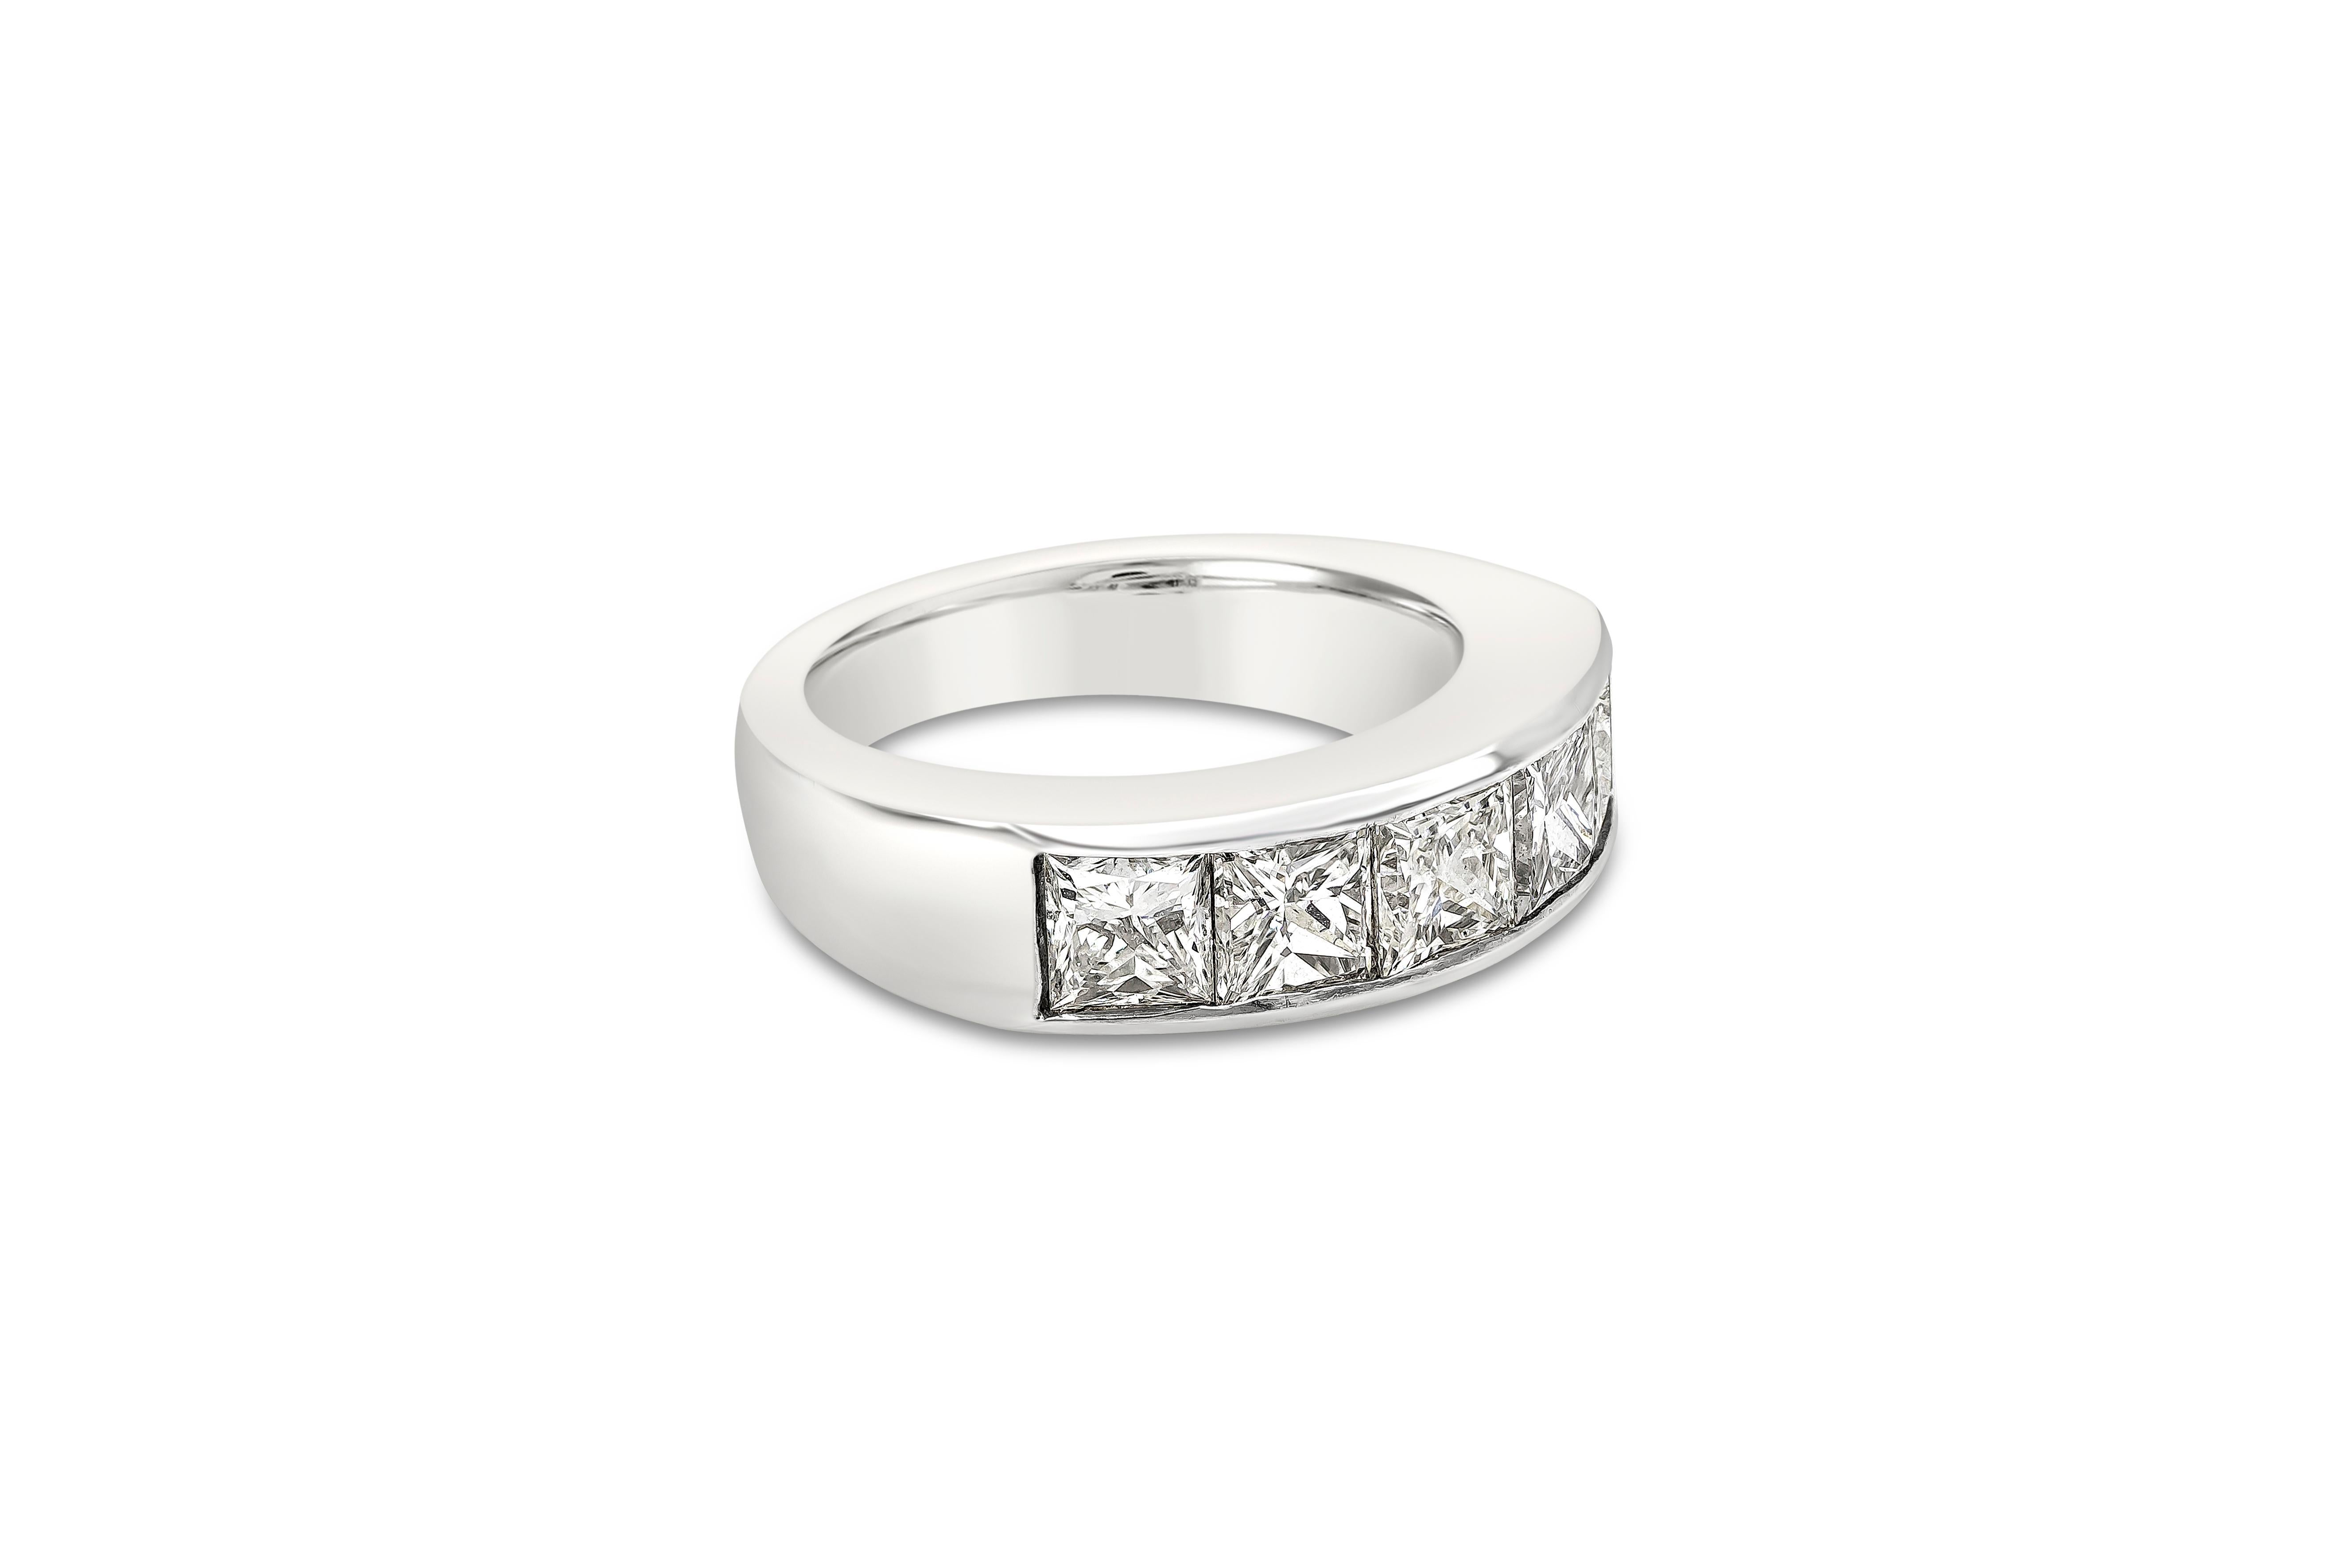 A five-stone classy wedding band showcasing brilliant princess cut diamonds weighing 2.51 carats total, channel set. Made with Platinum Size 6 US. Resizable upon request.

Roman Malakov is a custom house, specializing in creating anything you can